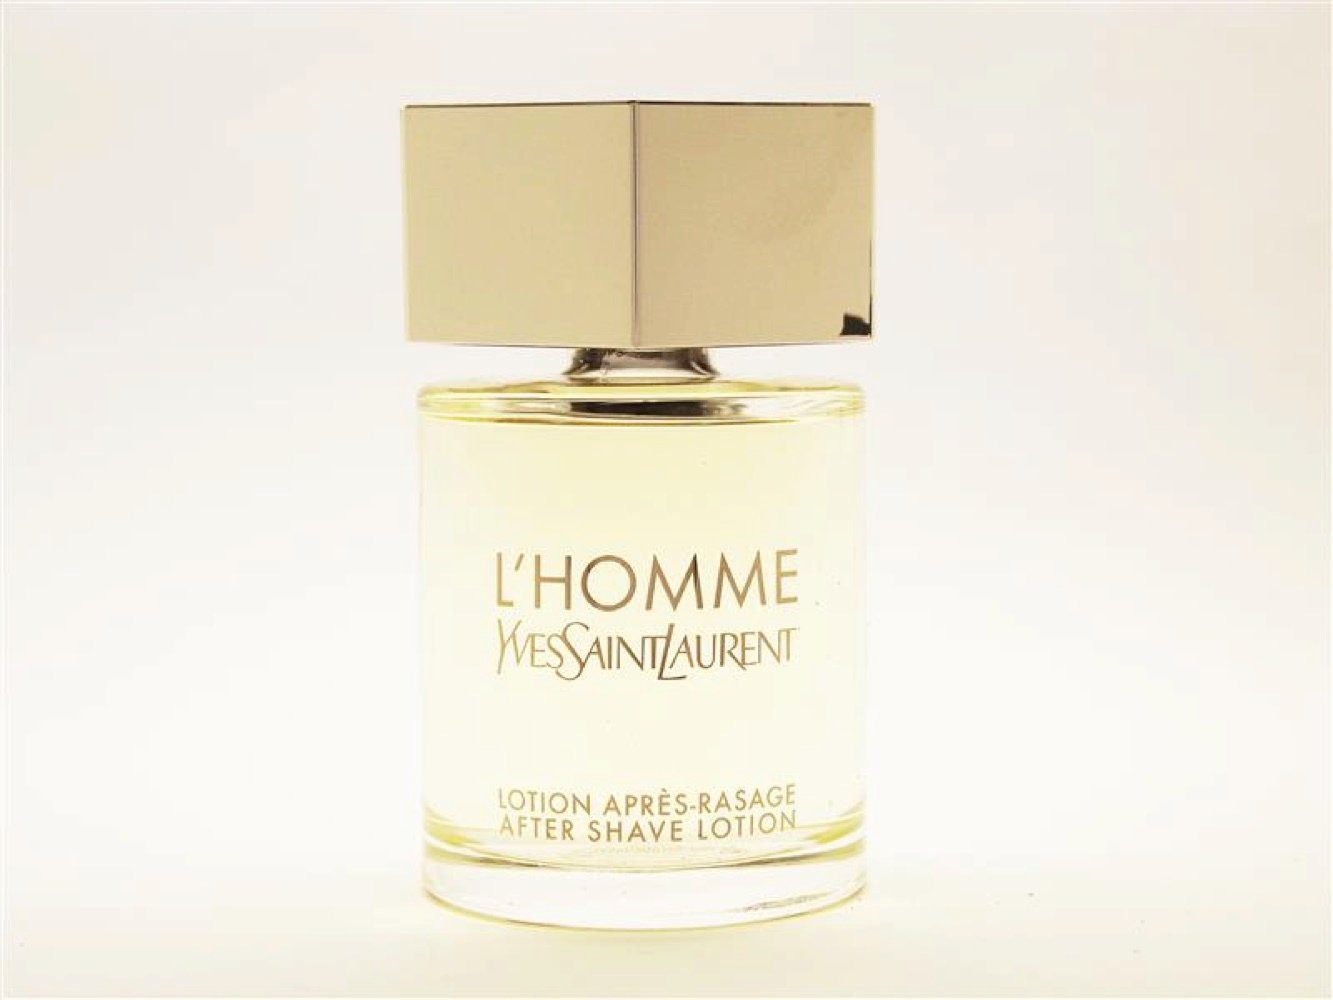 YVES SAINT LAURENT After Shave Lotion Yves Saint Laurent L'Homme After Shave Lotion 100 ml Packung